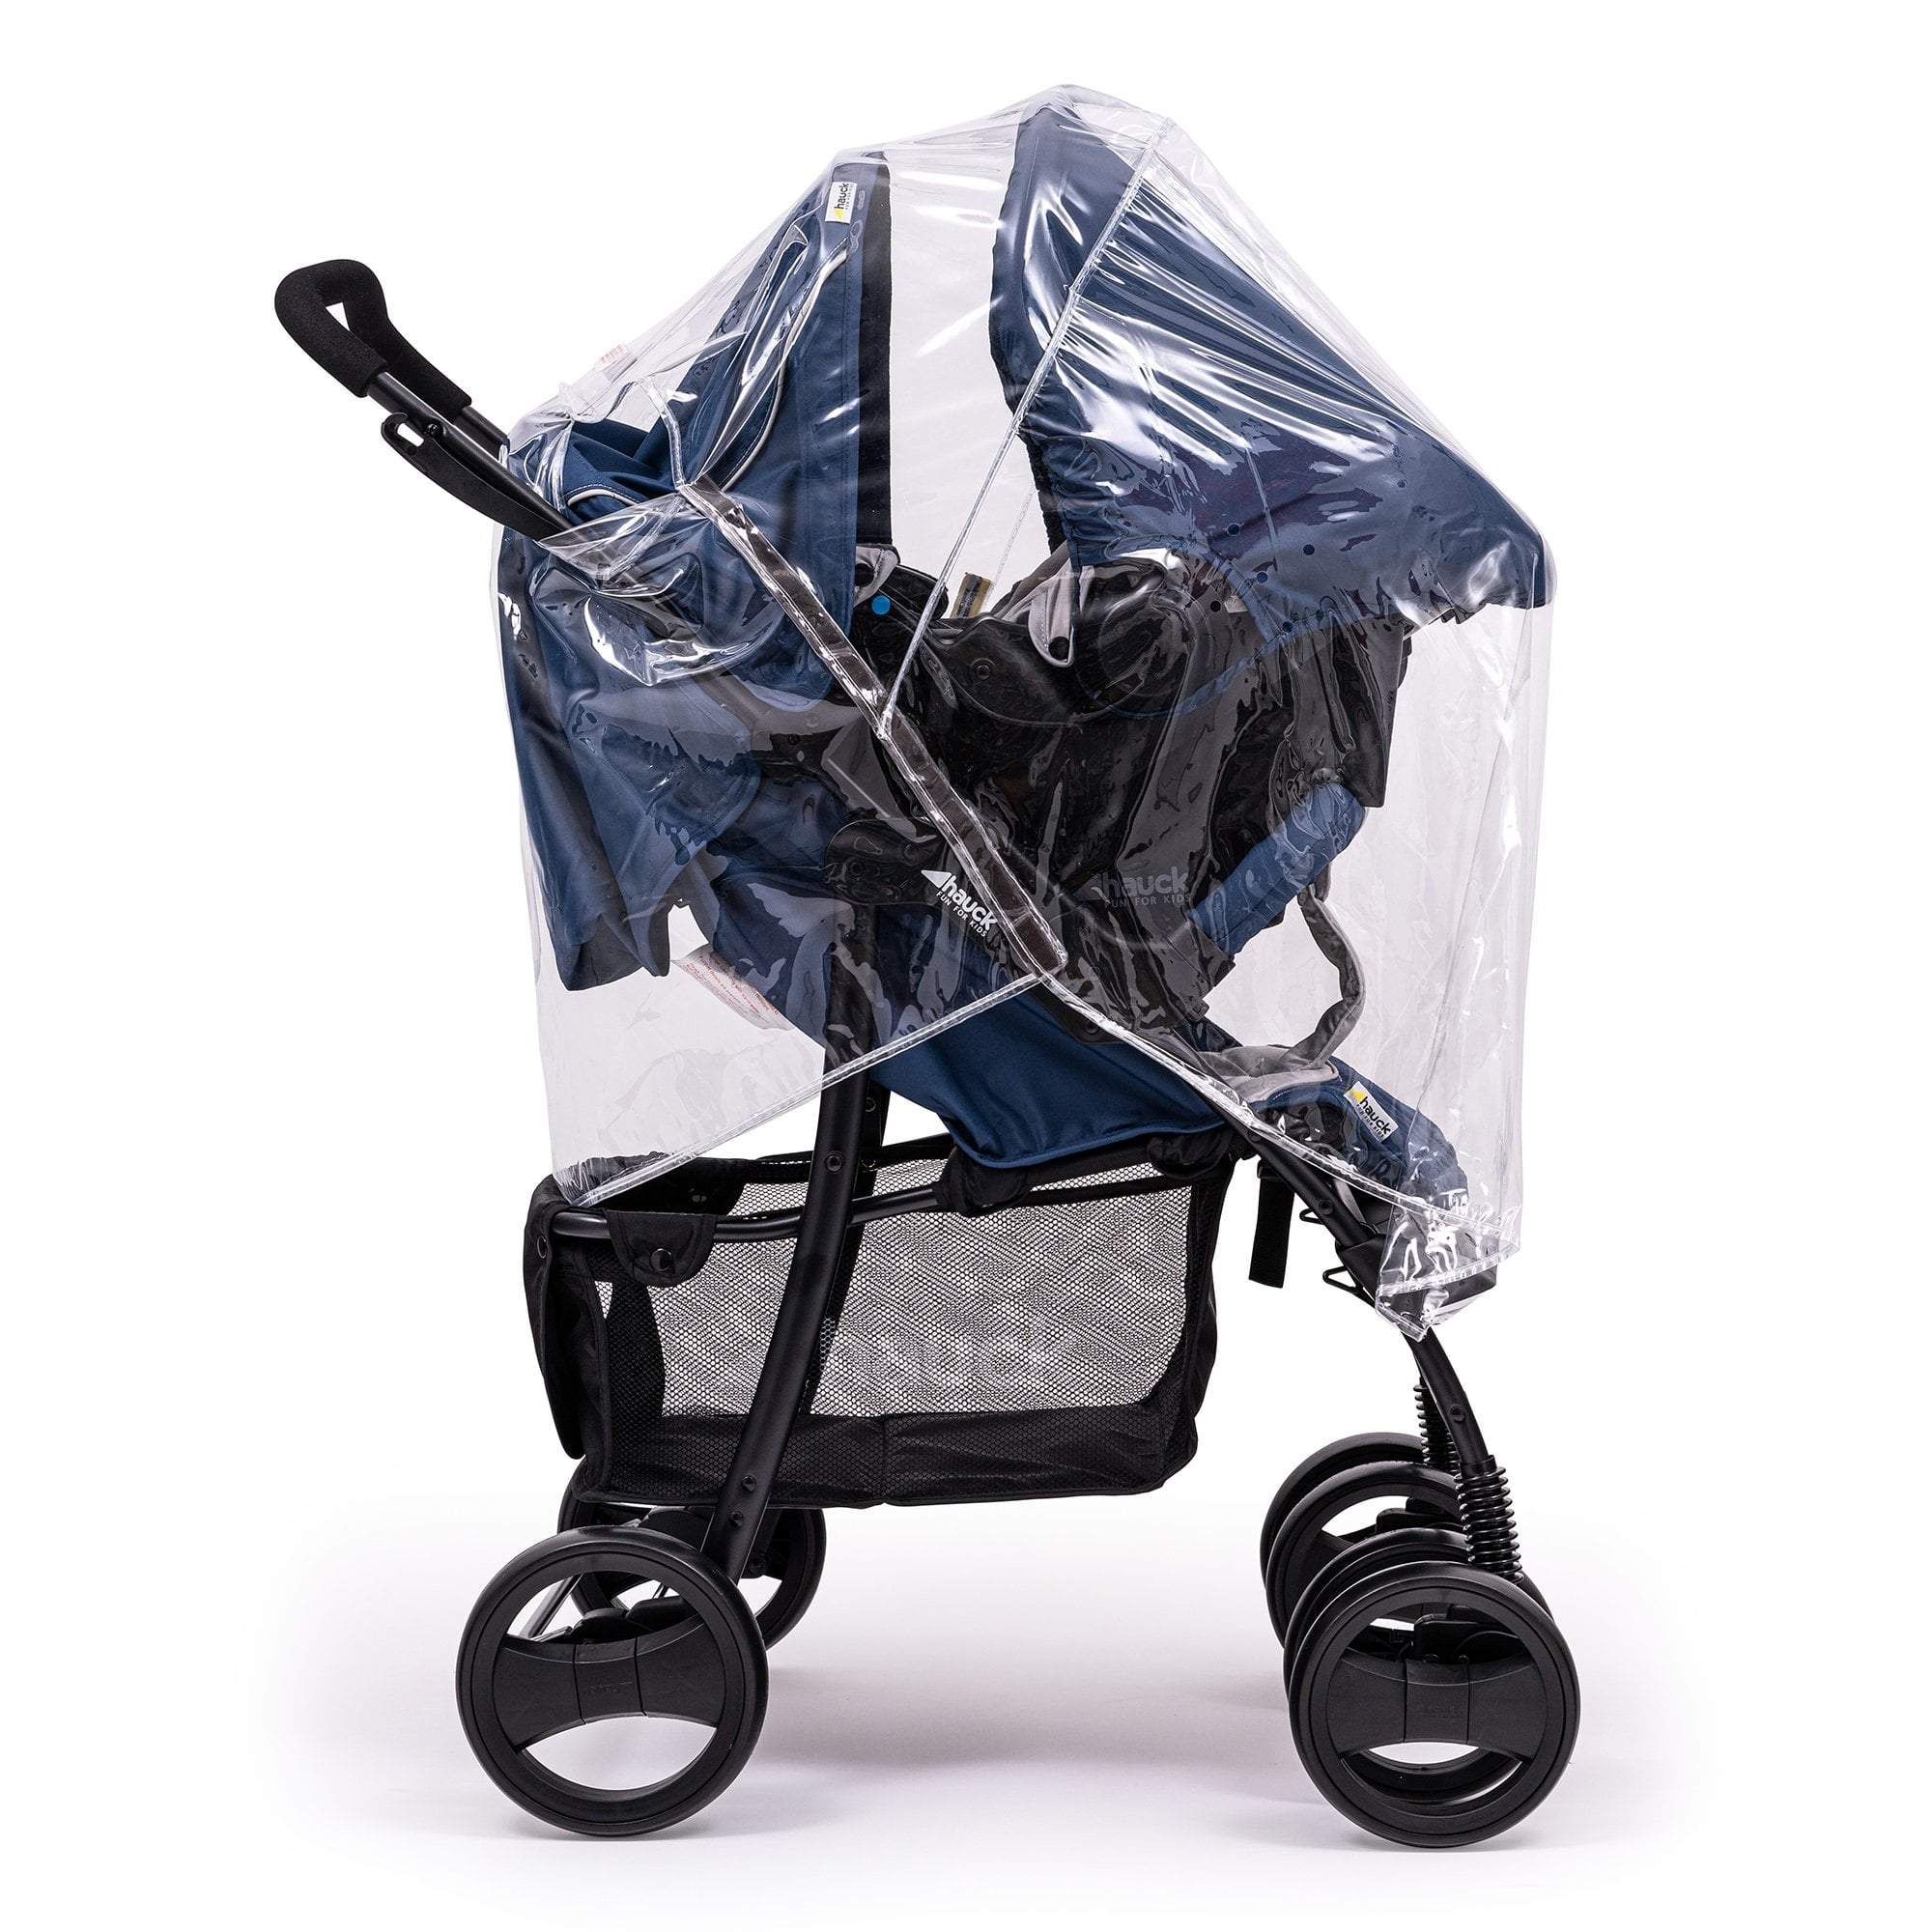 Travel System Raincover Compatible with BabySun - Fits All Models - For Your Little One